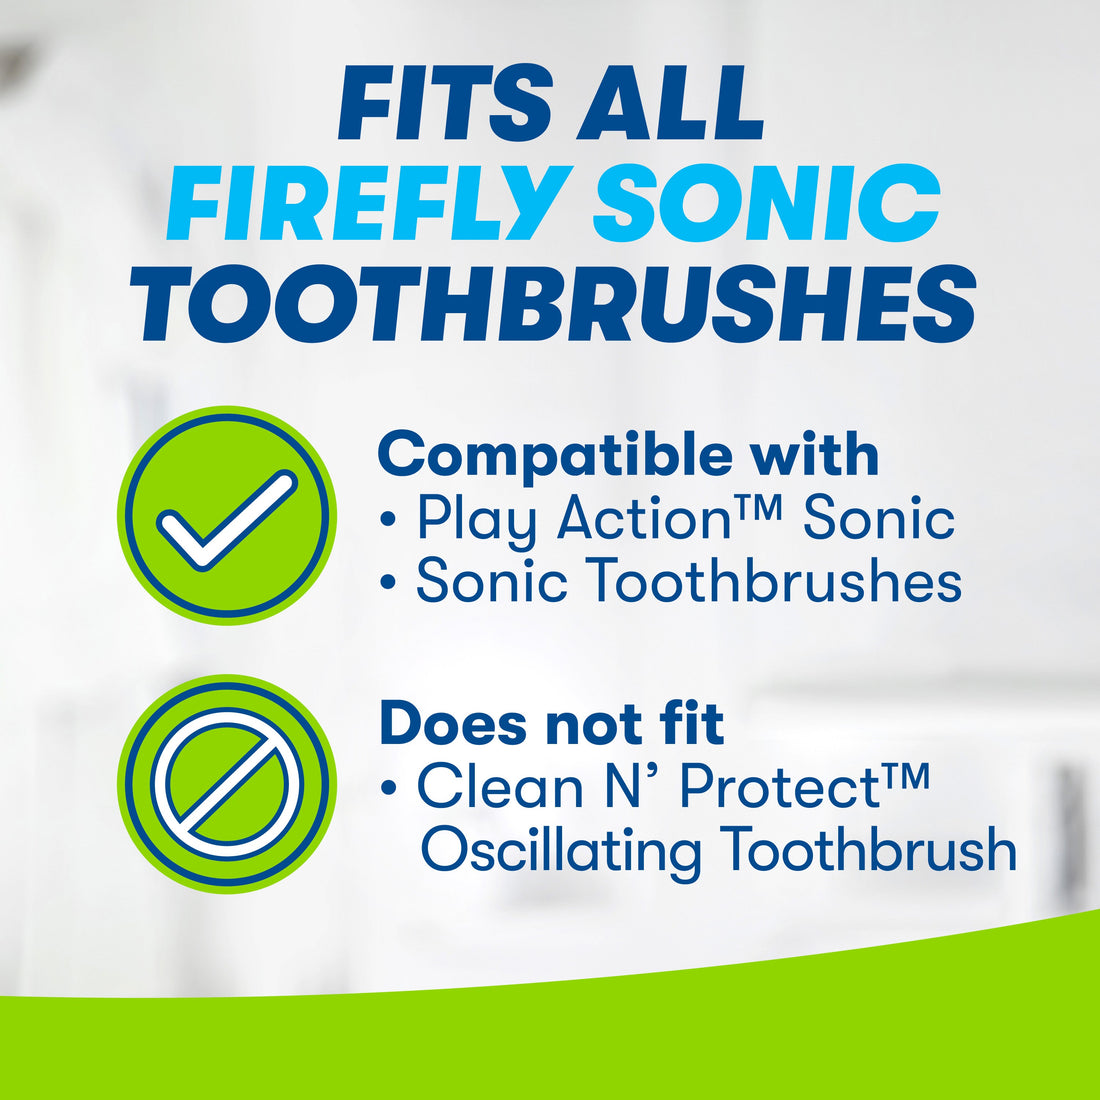 Fits all Firefly Sonic Toothbrushes. Icons: Compatible with Play Action Sonic, Sonic toothbrushes, does not fit Clean N&